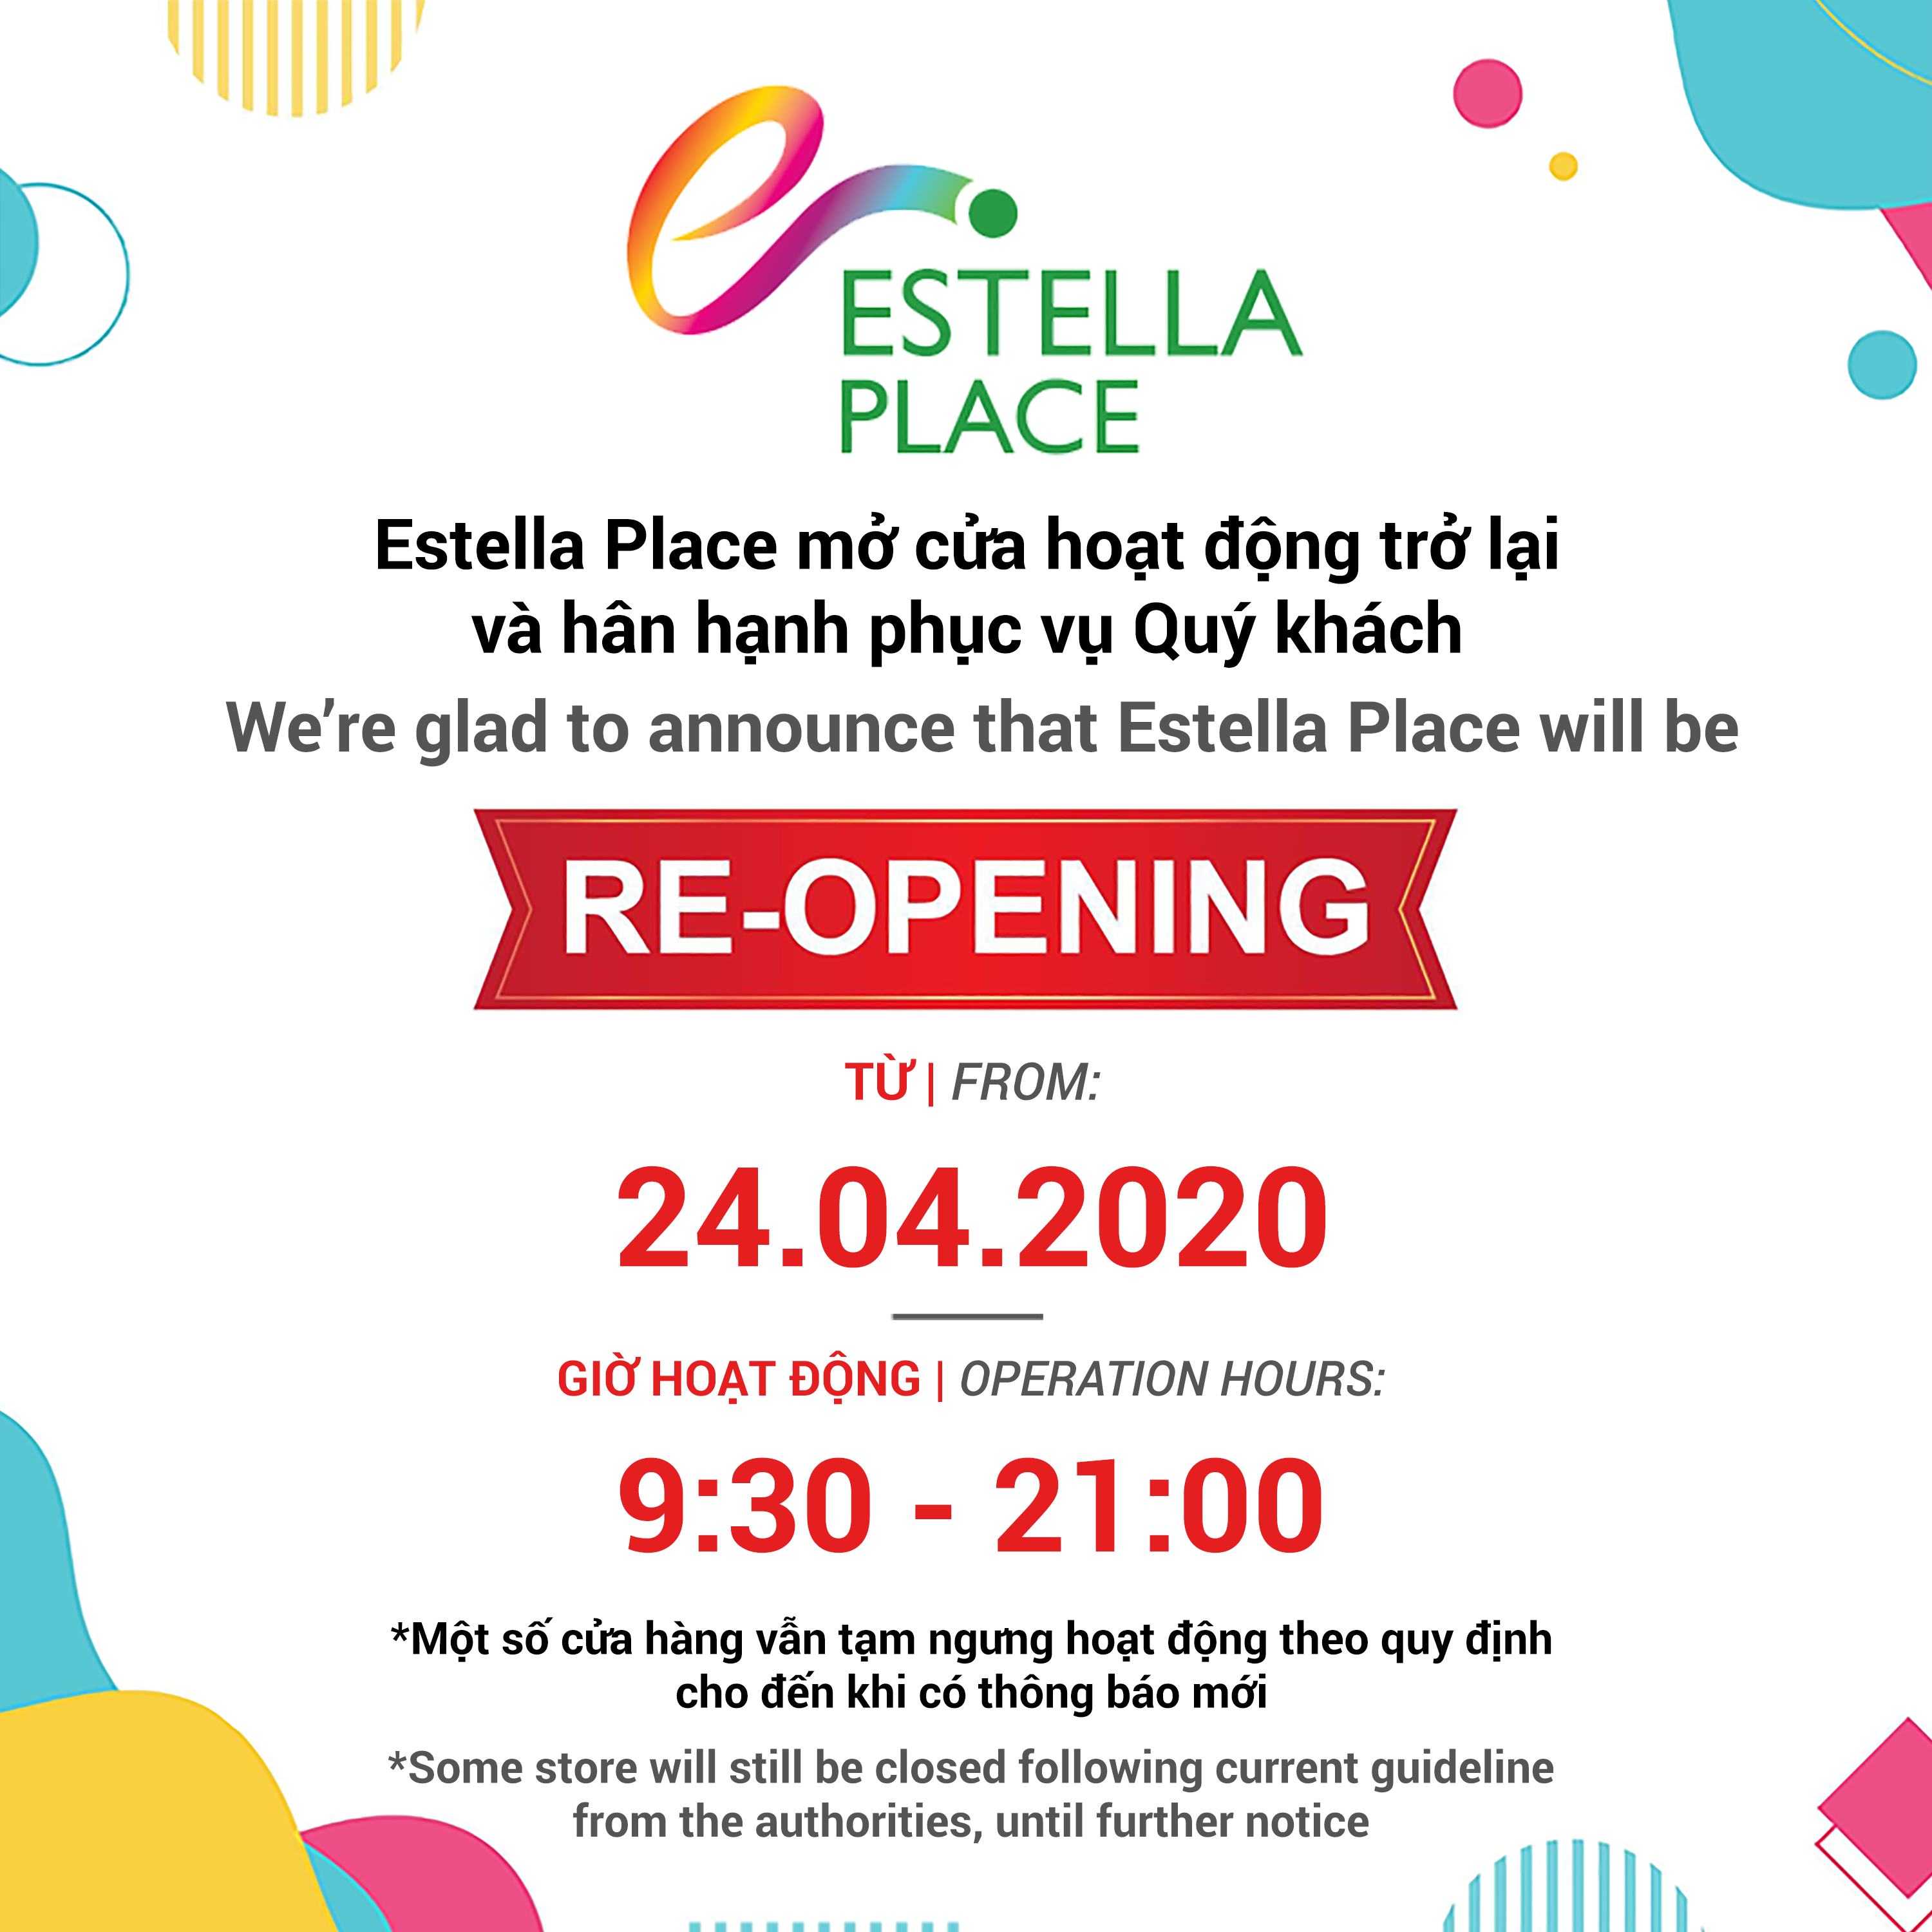 [24/04/2020] SAVE THE DATE WITH ESTELLA PLACE!